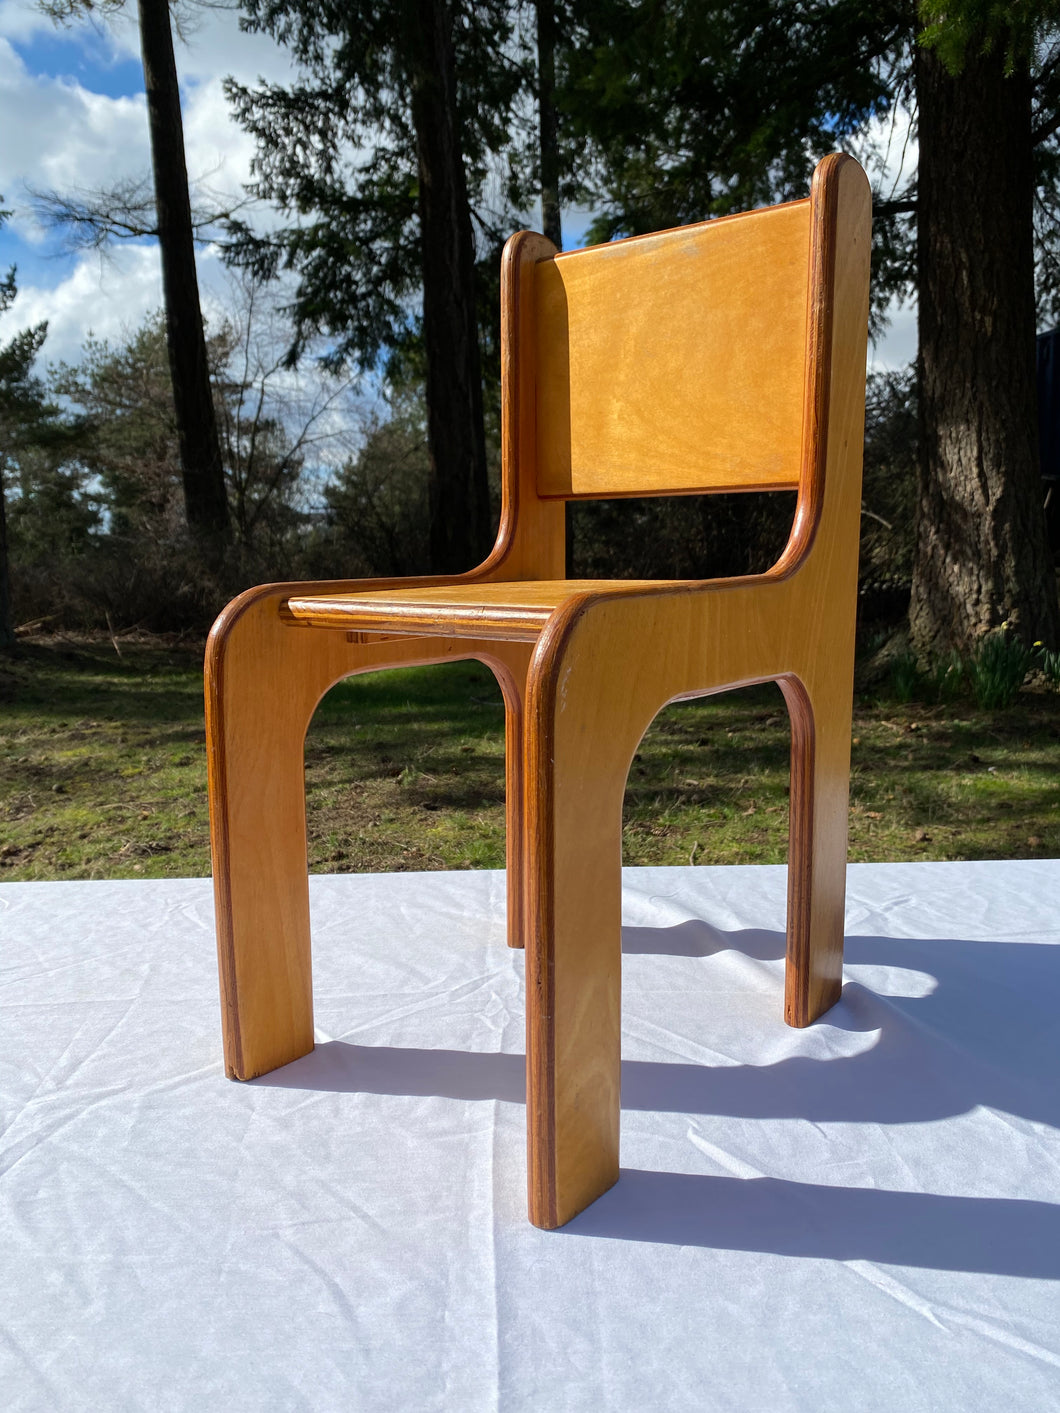 Wooden Chair #13: 11.5 Inches